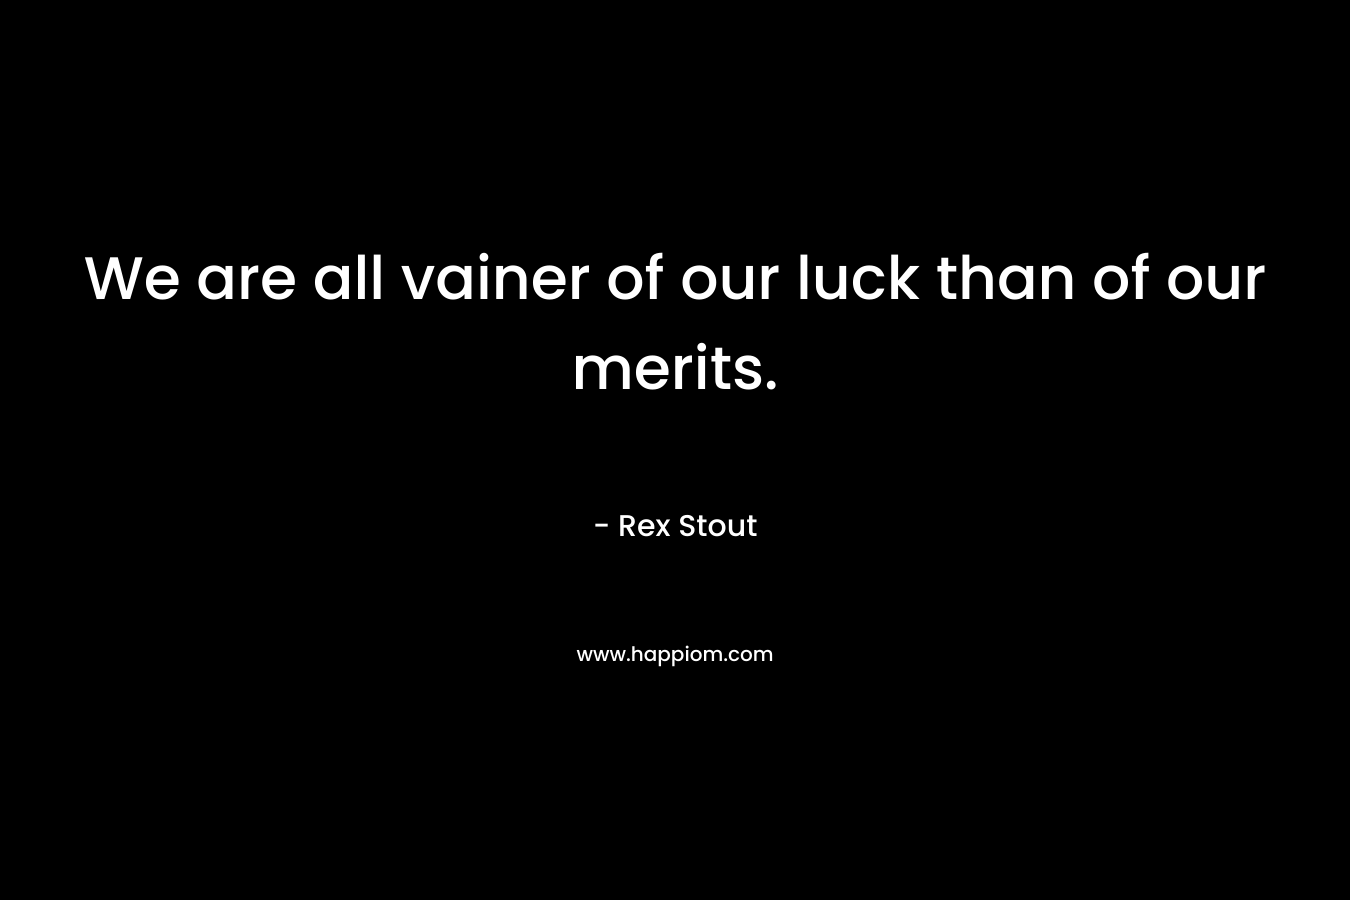 We are all vainer of our luck than of our merits. – Rex Stout